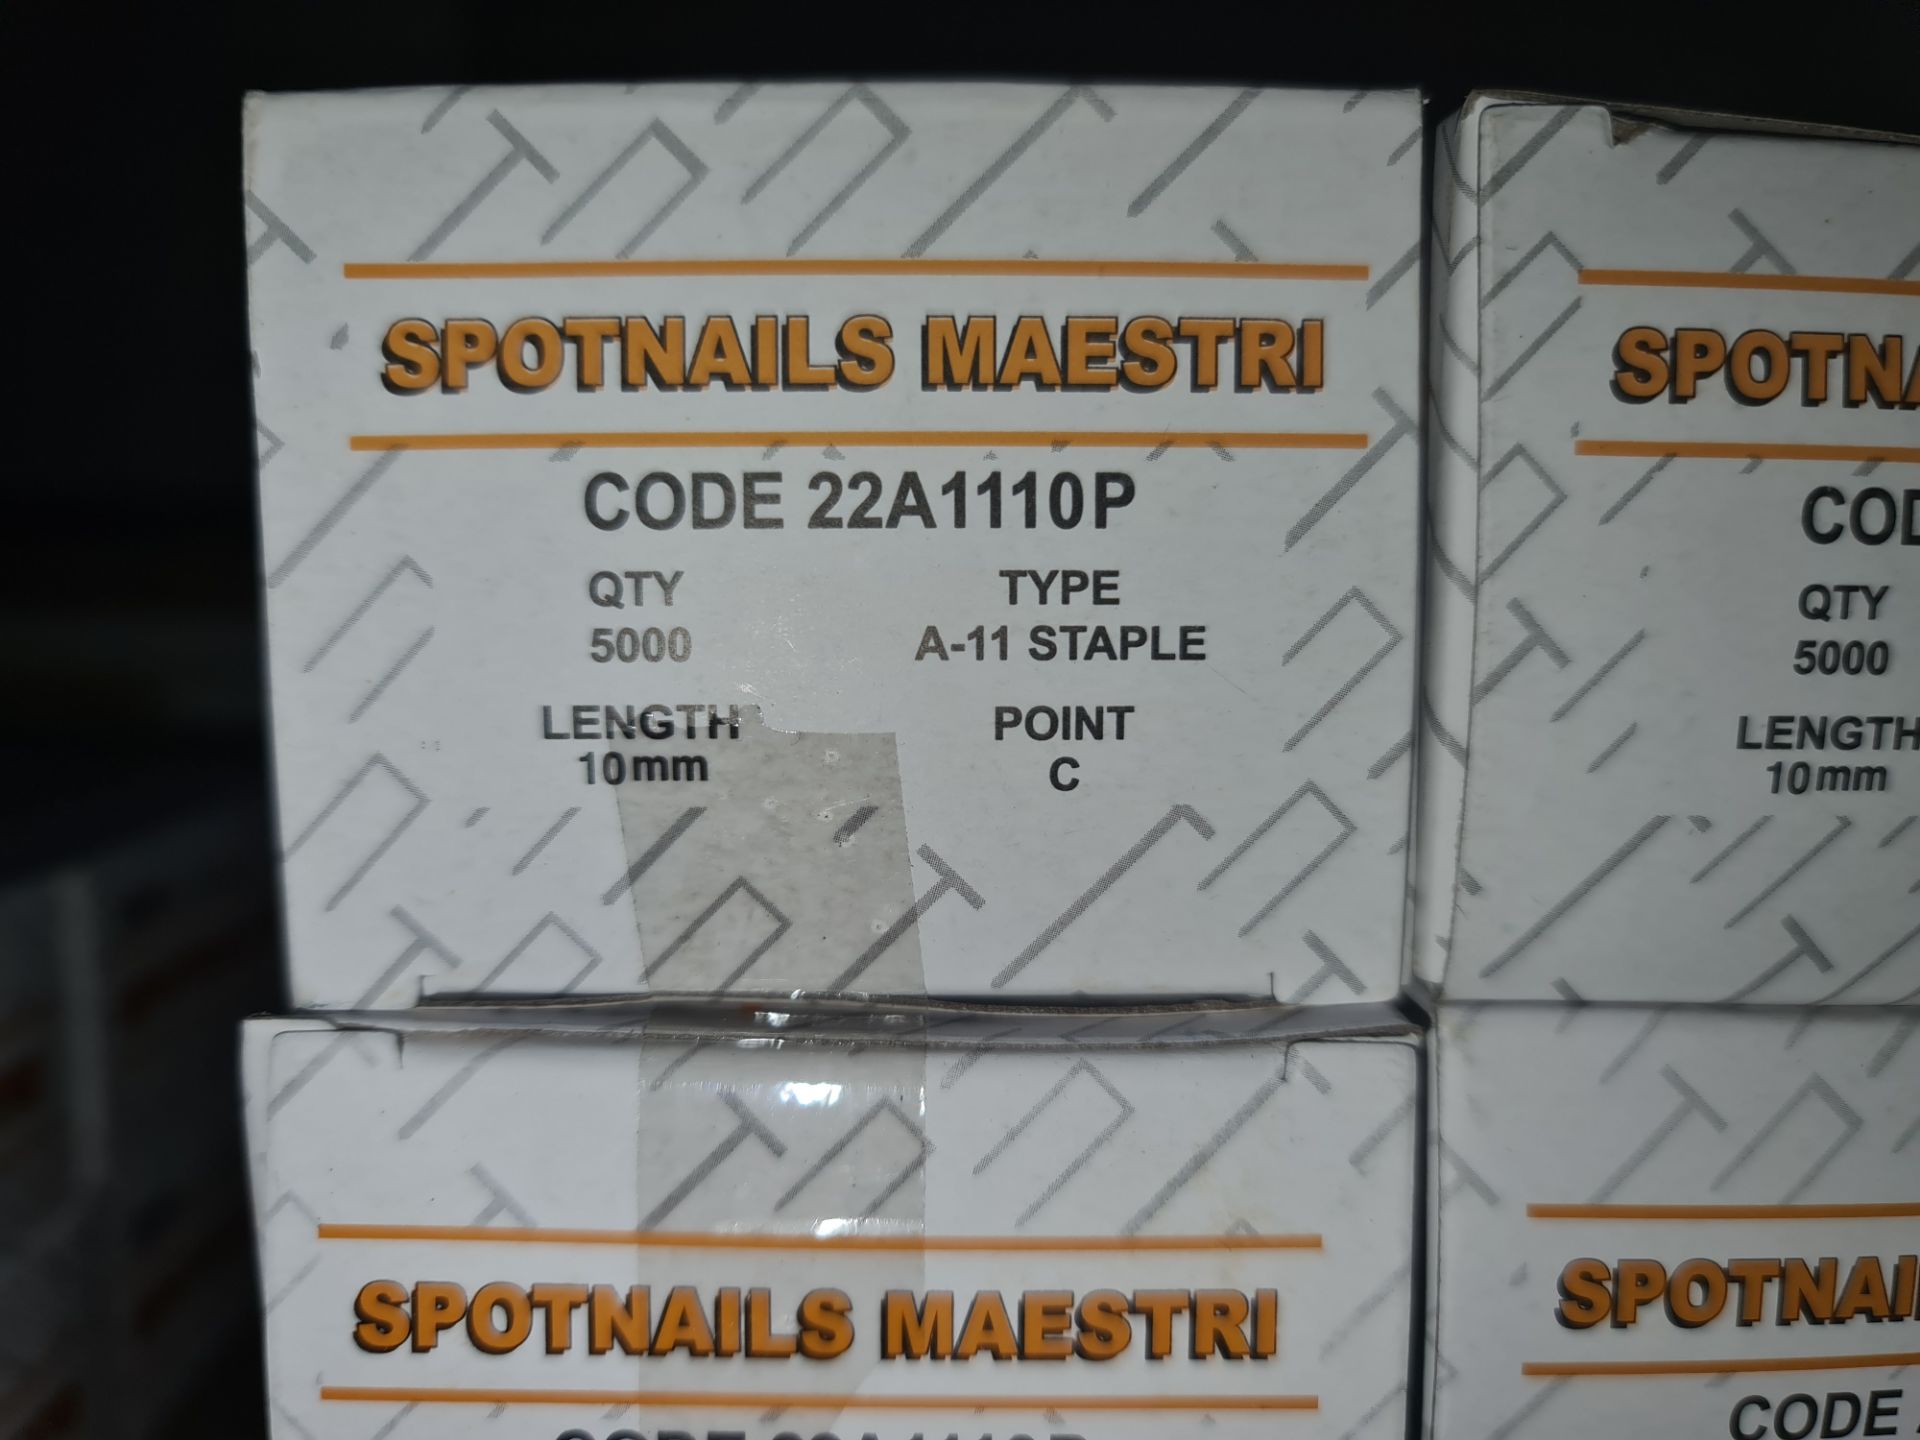 17 boxes of Maestri Spotnails, each box containing 5,000 type A-11.C 10mm staples. Product code - Image 3 of 3